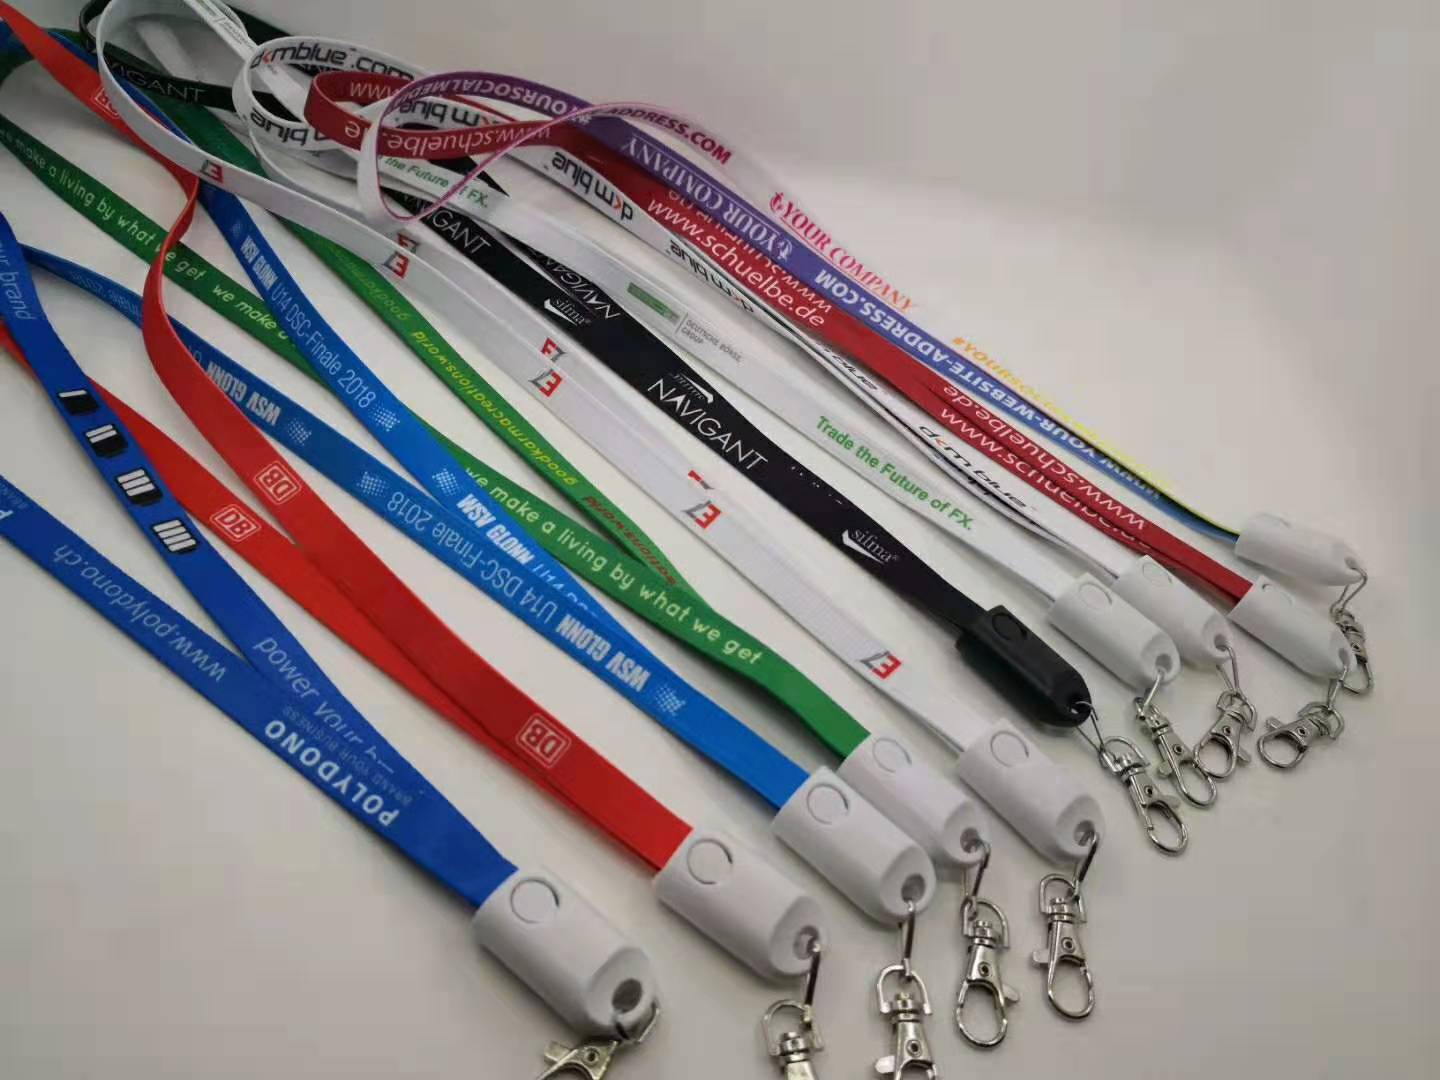 2-in-1 Lanyard Cell Phone Charging Cable